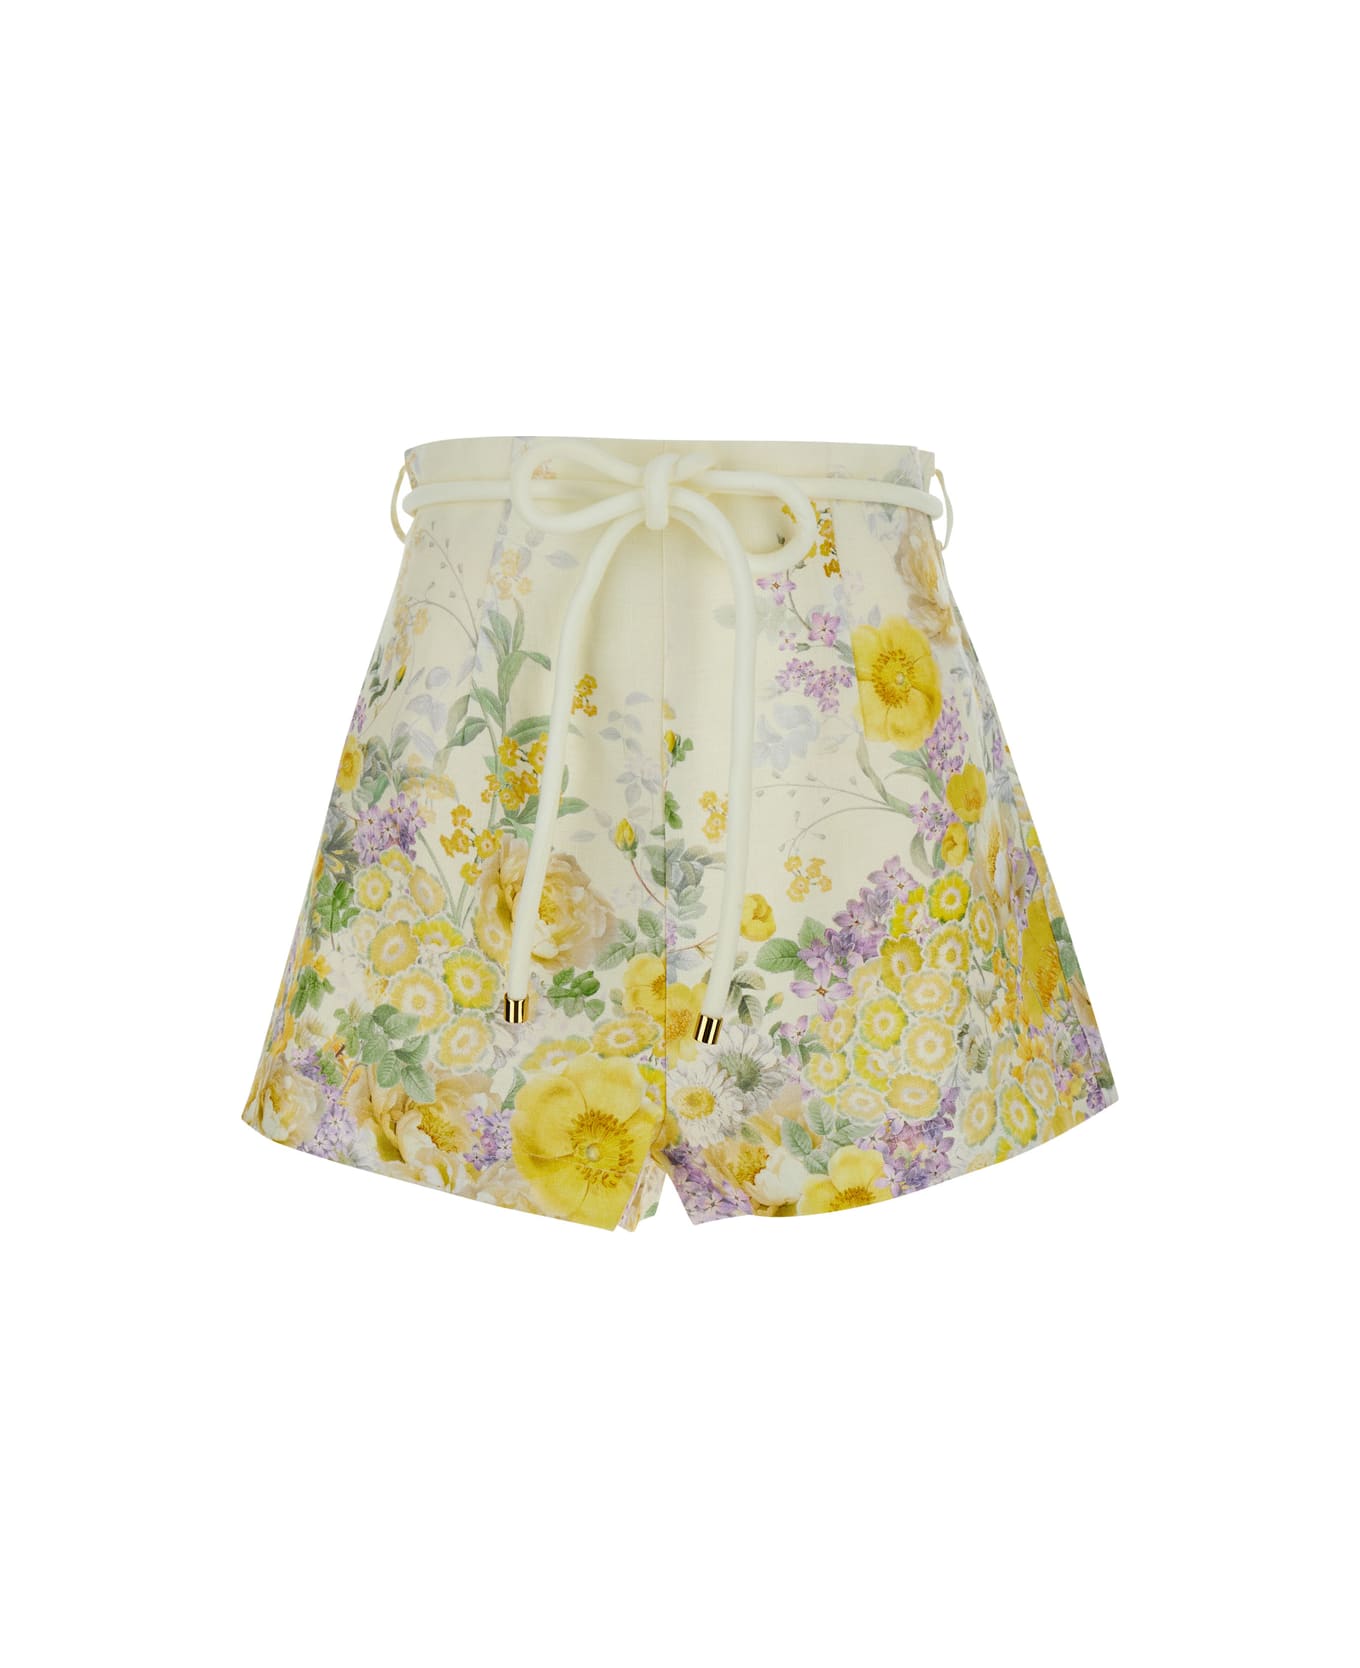 Zimmermann Yellow Bermuda Shorts With Floral Print In Linen Woman - Yellow ショートパンツ